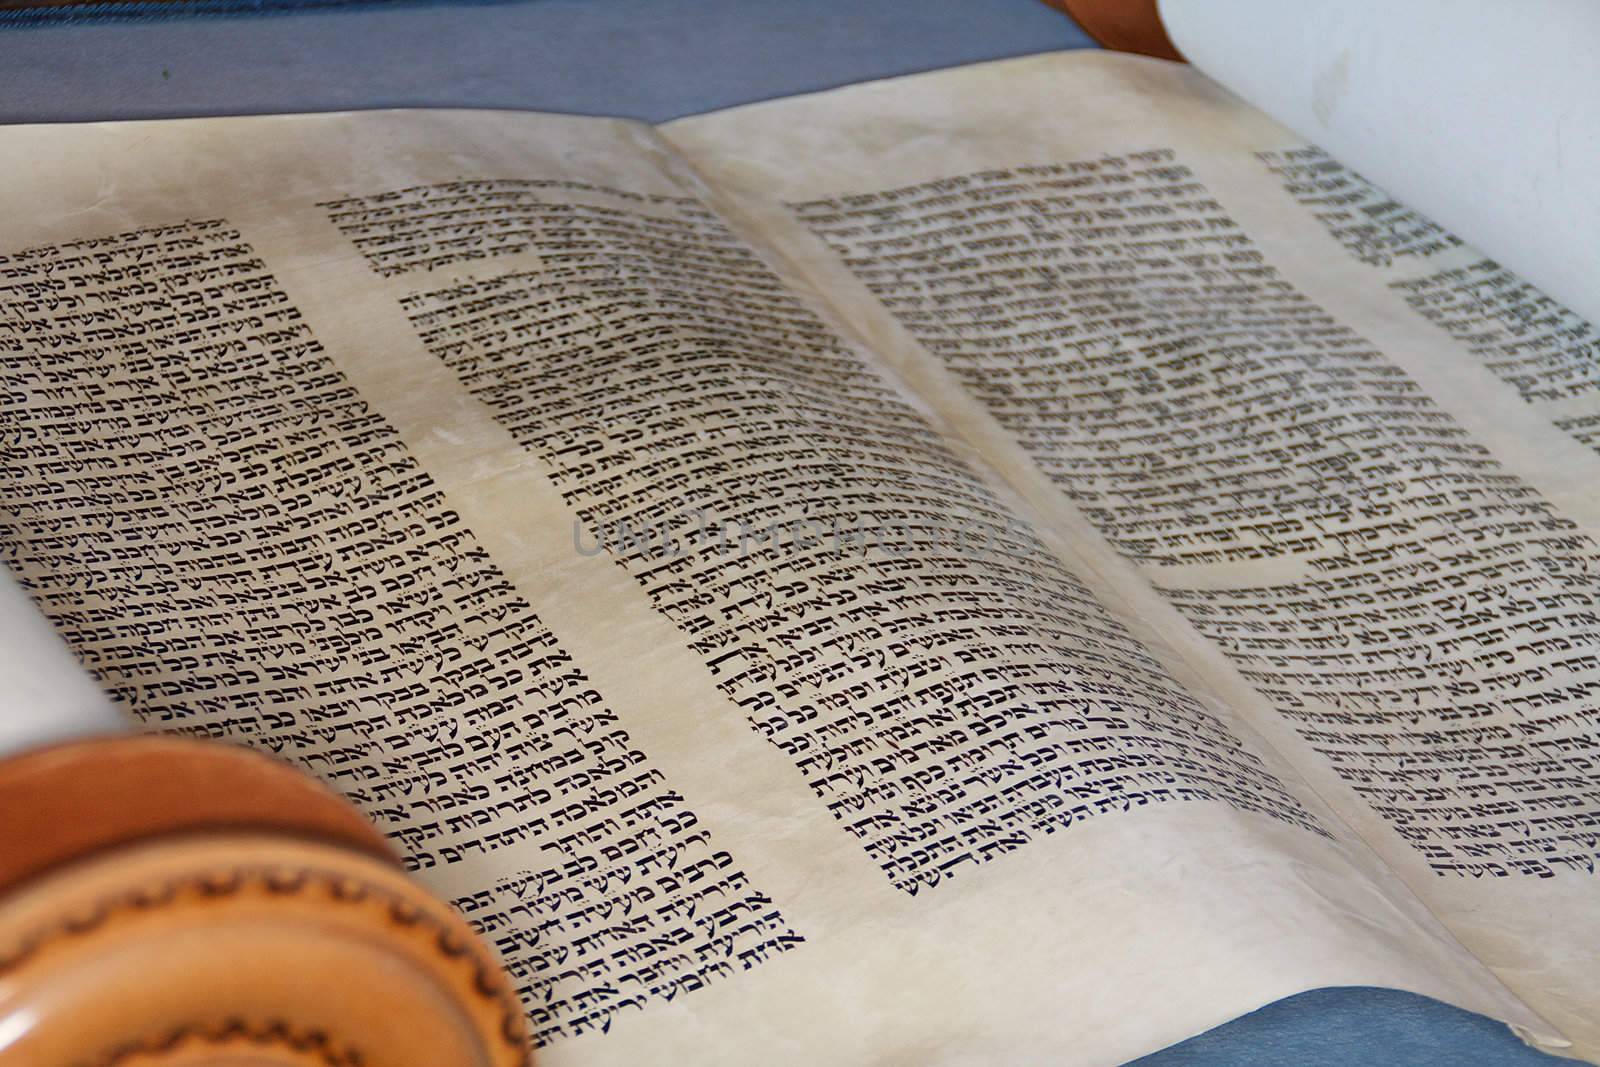 The hebrew Torah, displayed here on a synagogue alter, is hand written on goat skin parchement by a specially trained scribe using a feather quill